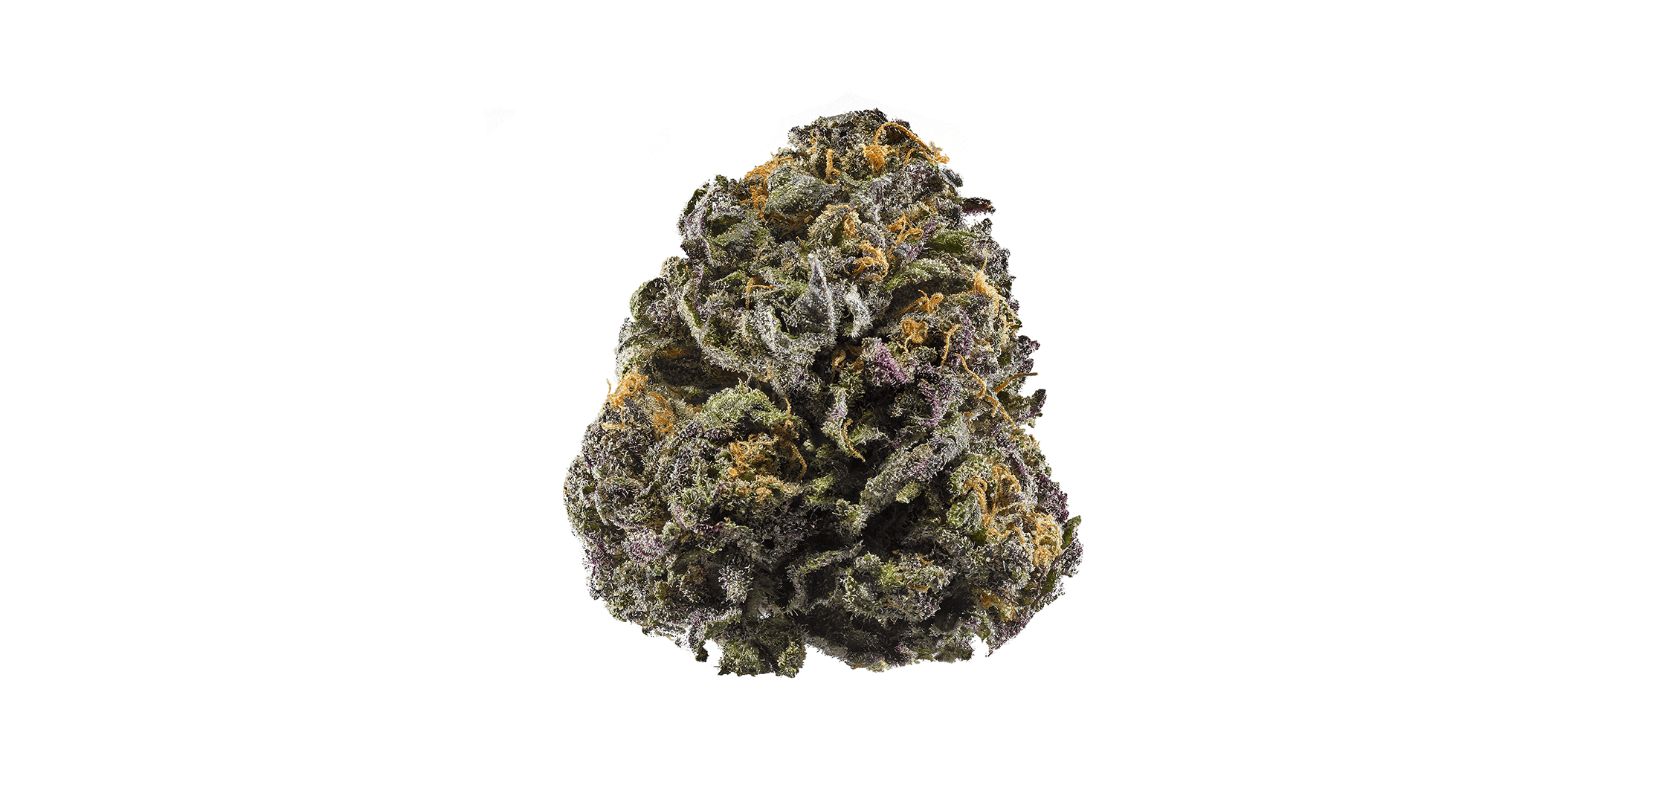 The unique sensorial journey that the Grand Daddy Purple strain offers is primarily influenced by its distinct terpene profile. 